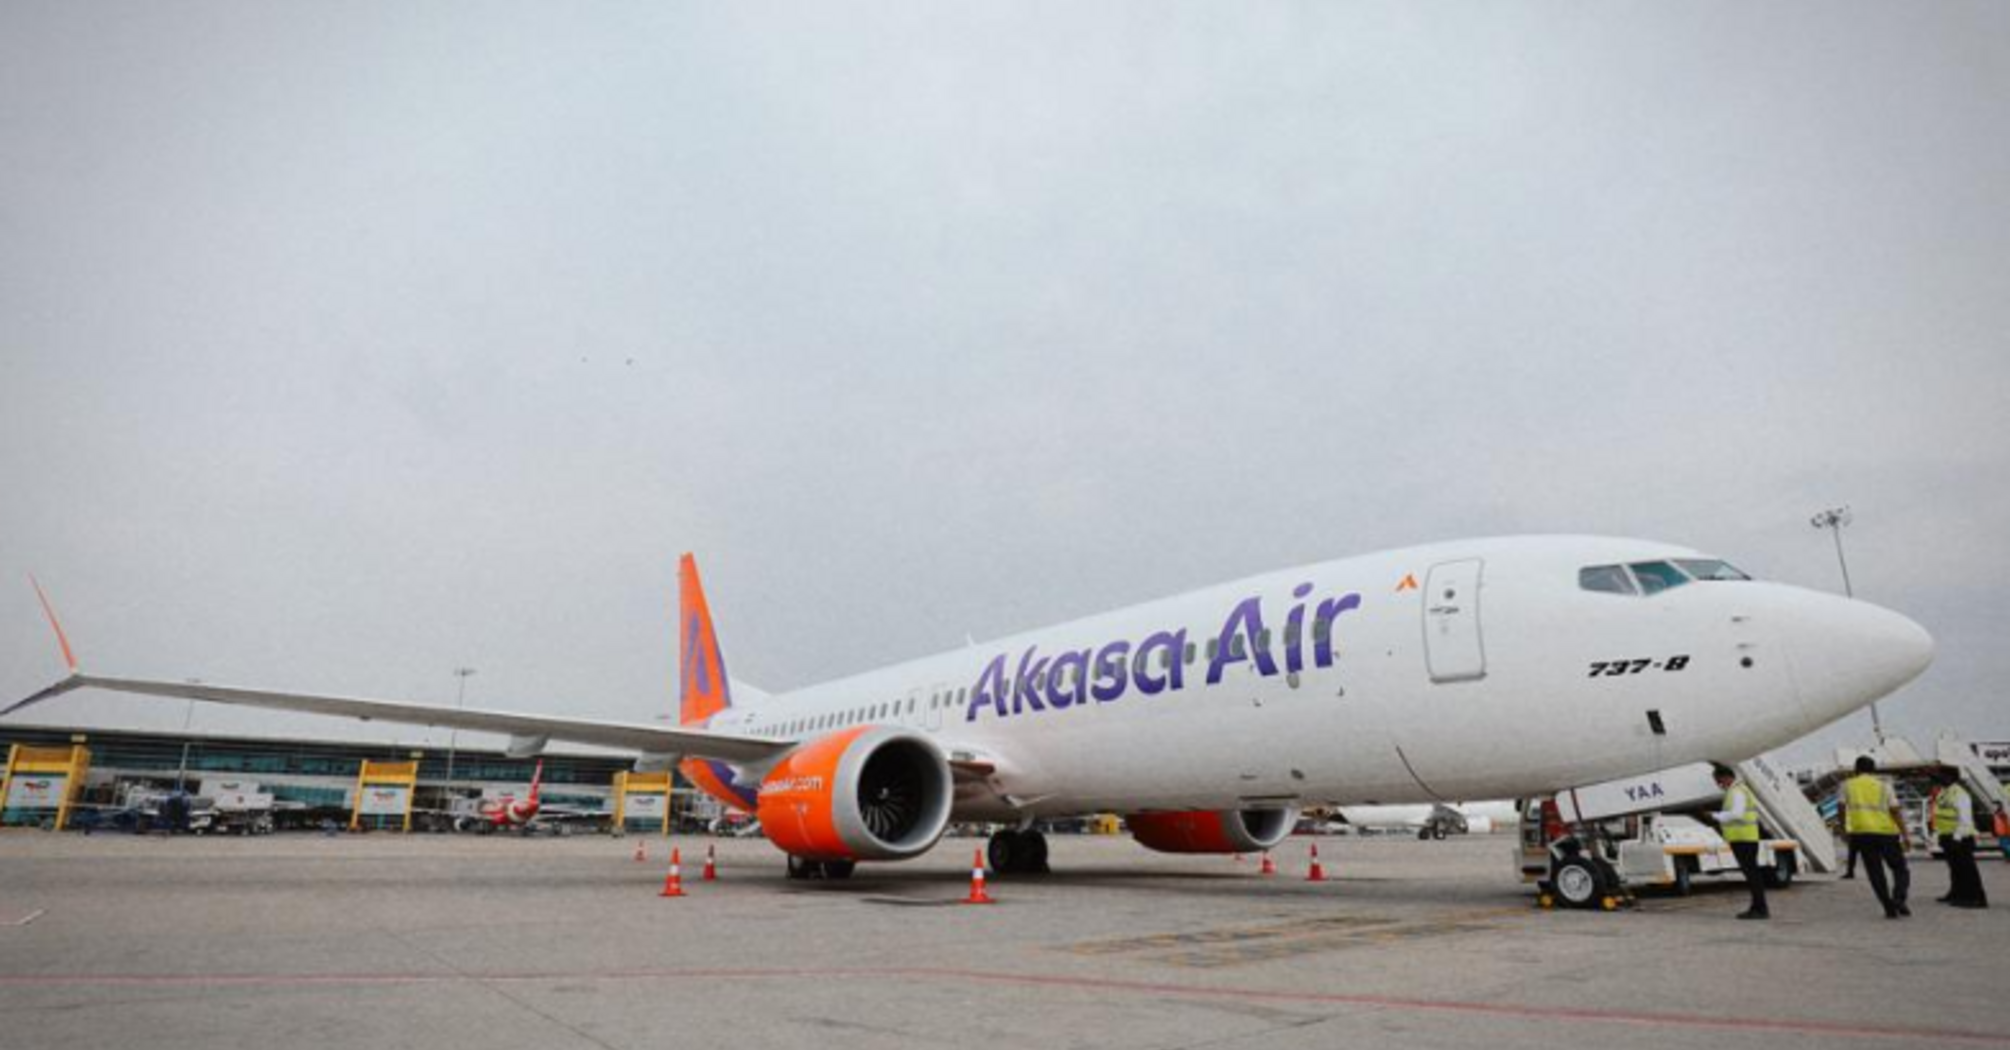 Rapid Expansion: Akasa Air announced the introduction of international flights just 19 months after its launch